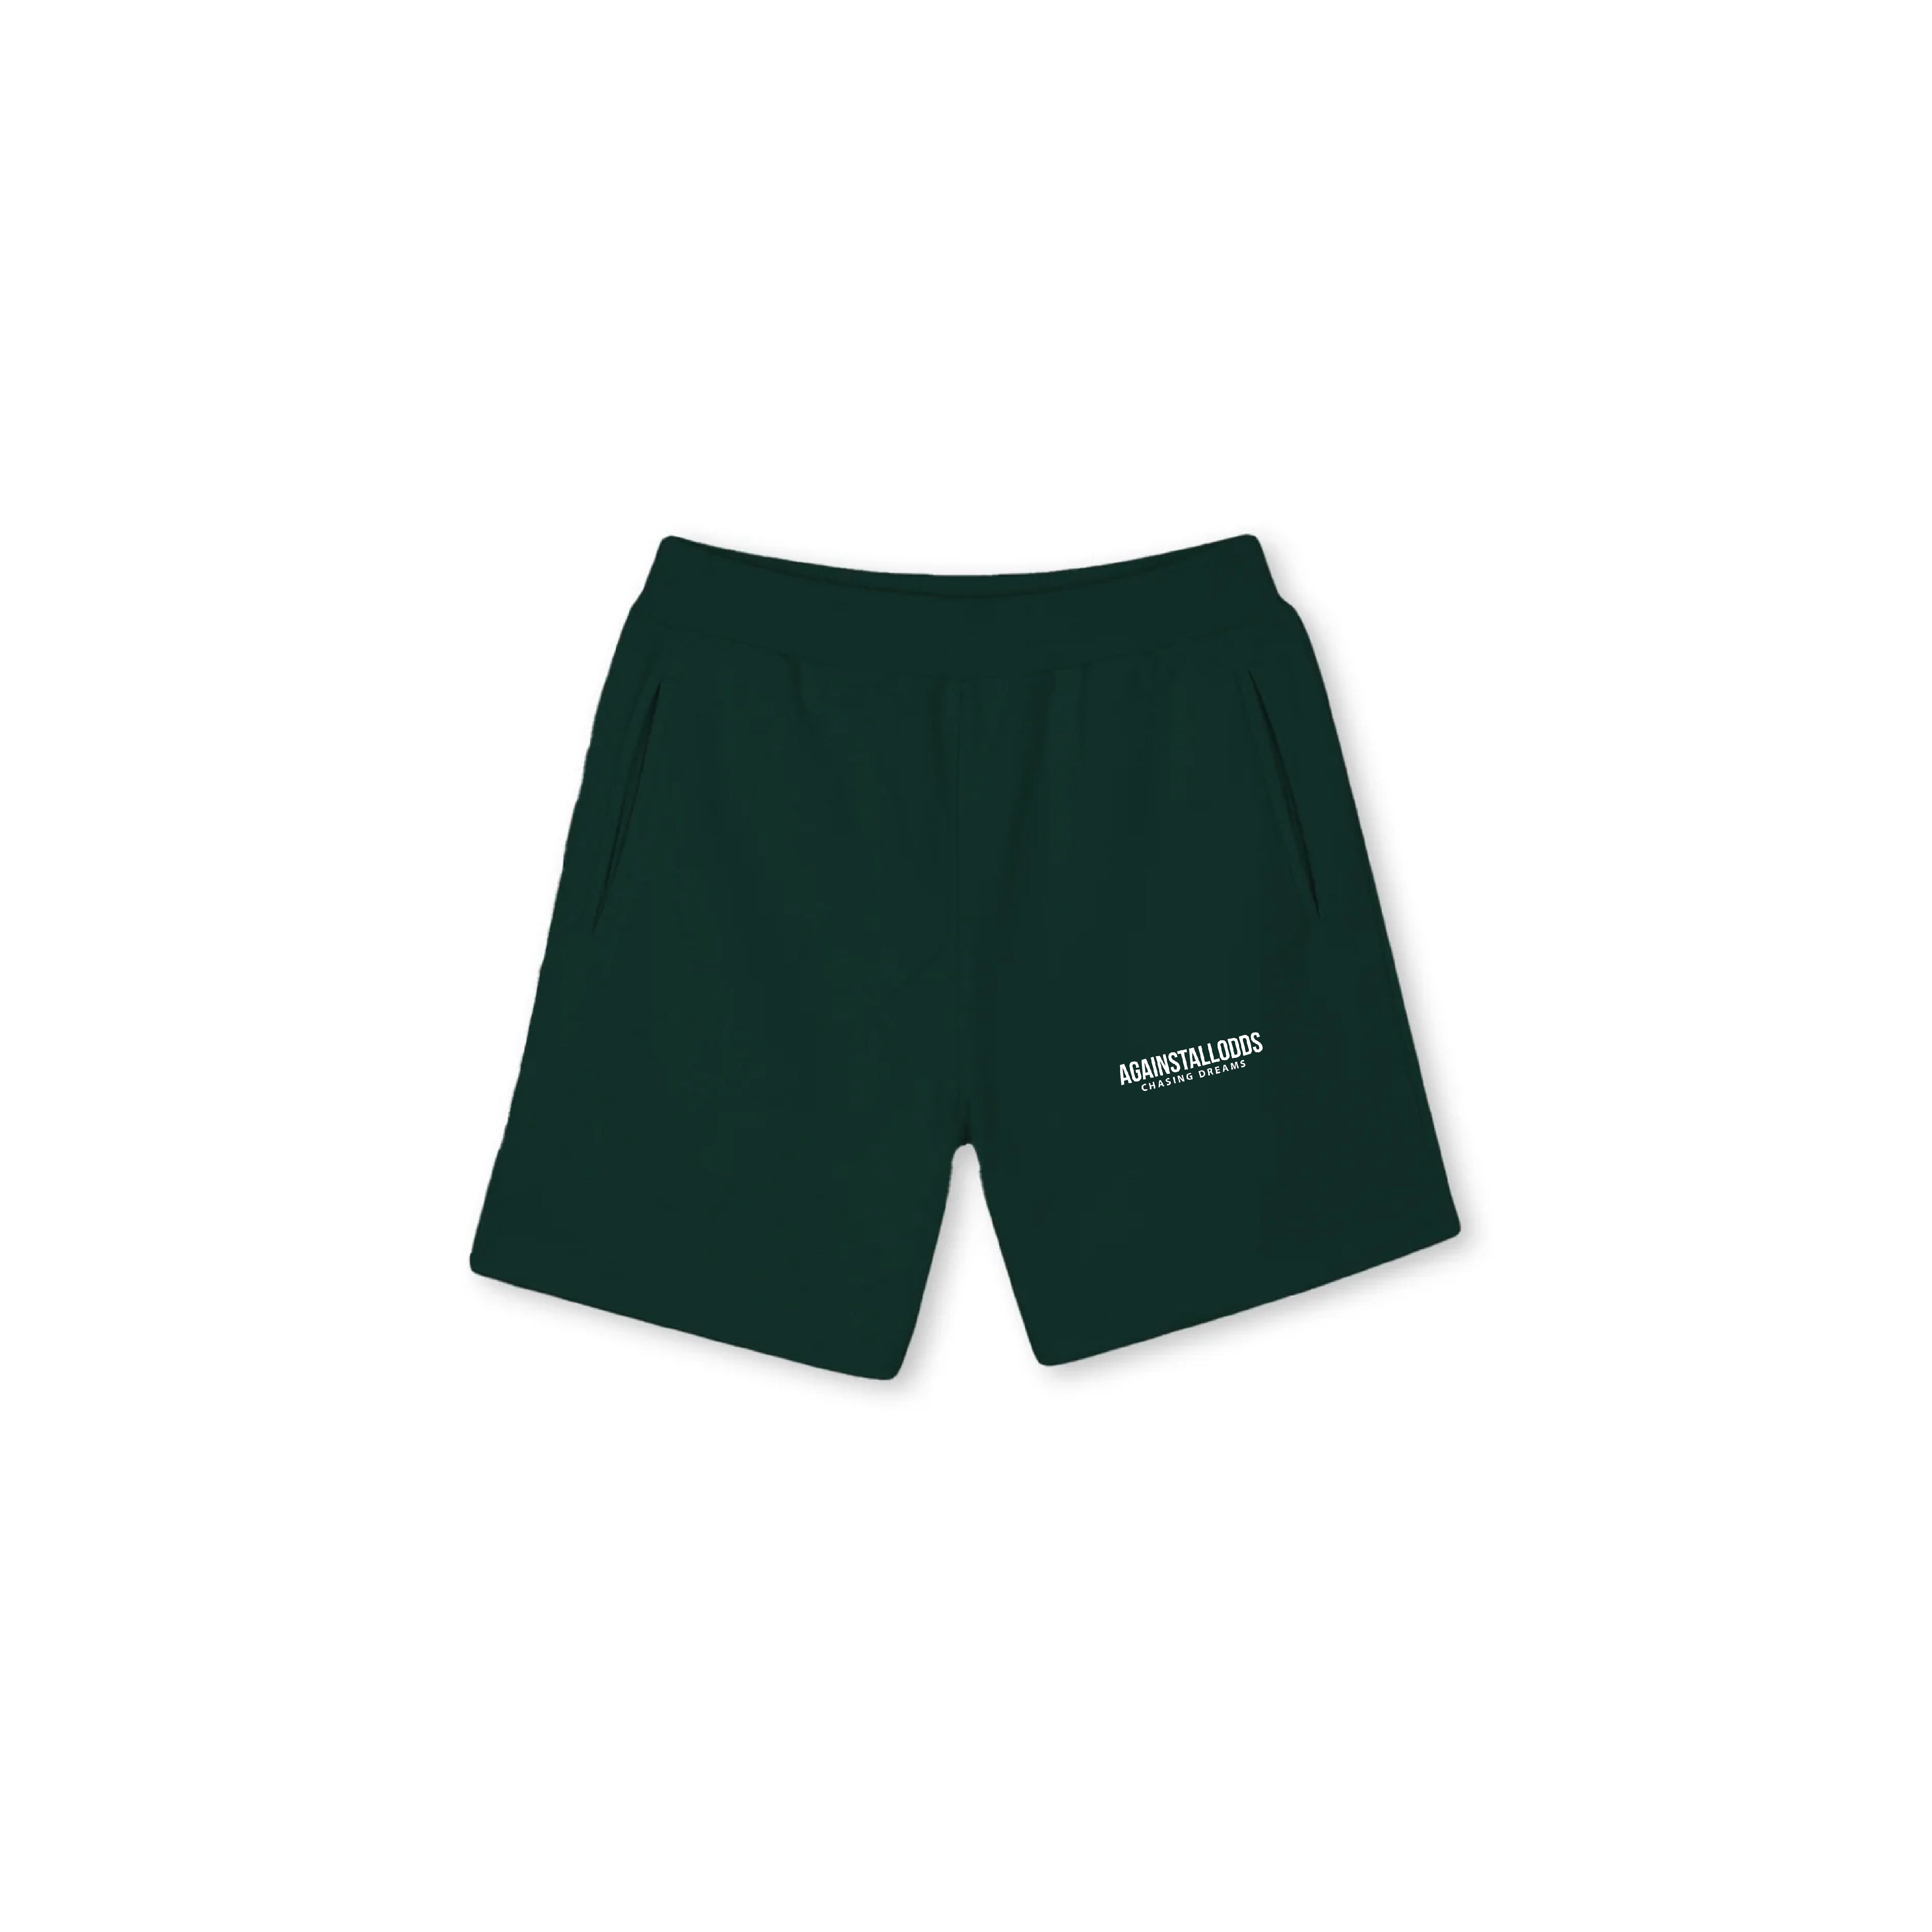 Dreamers French Terry Shorts - Wild Green